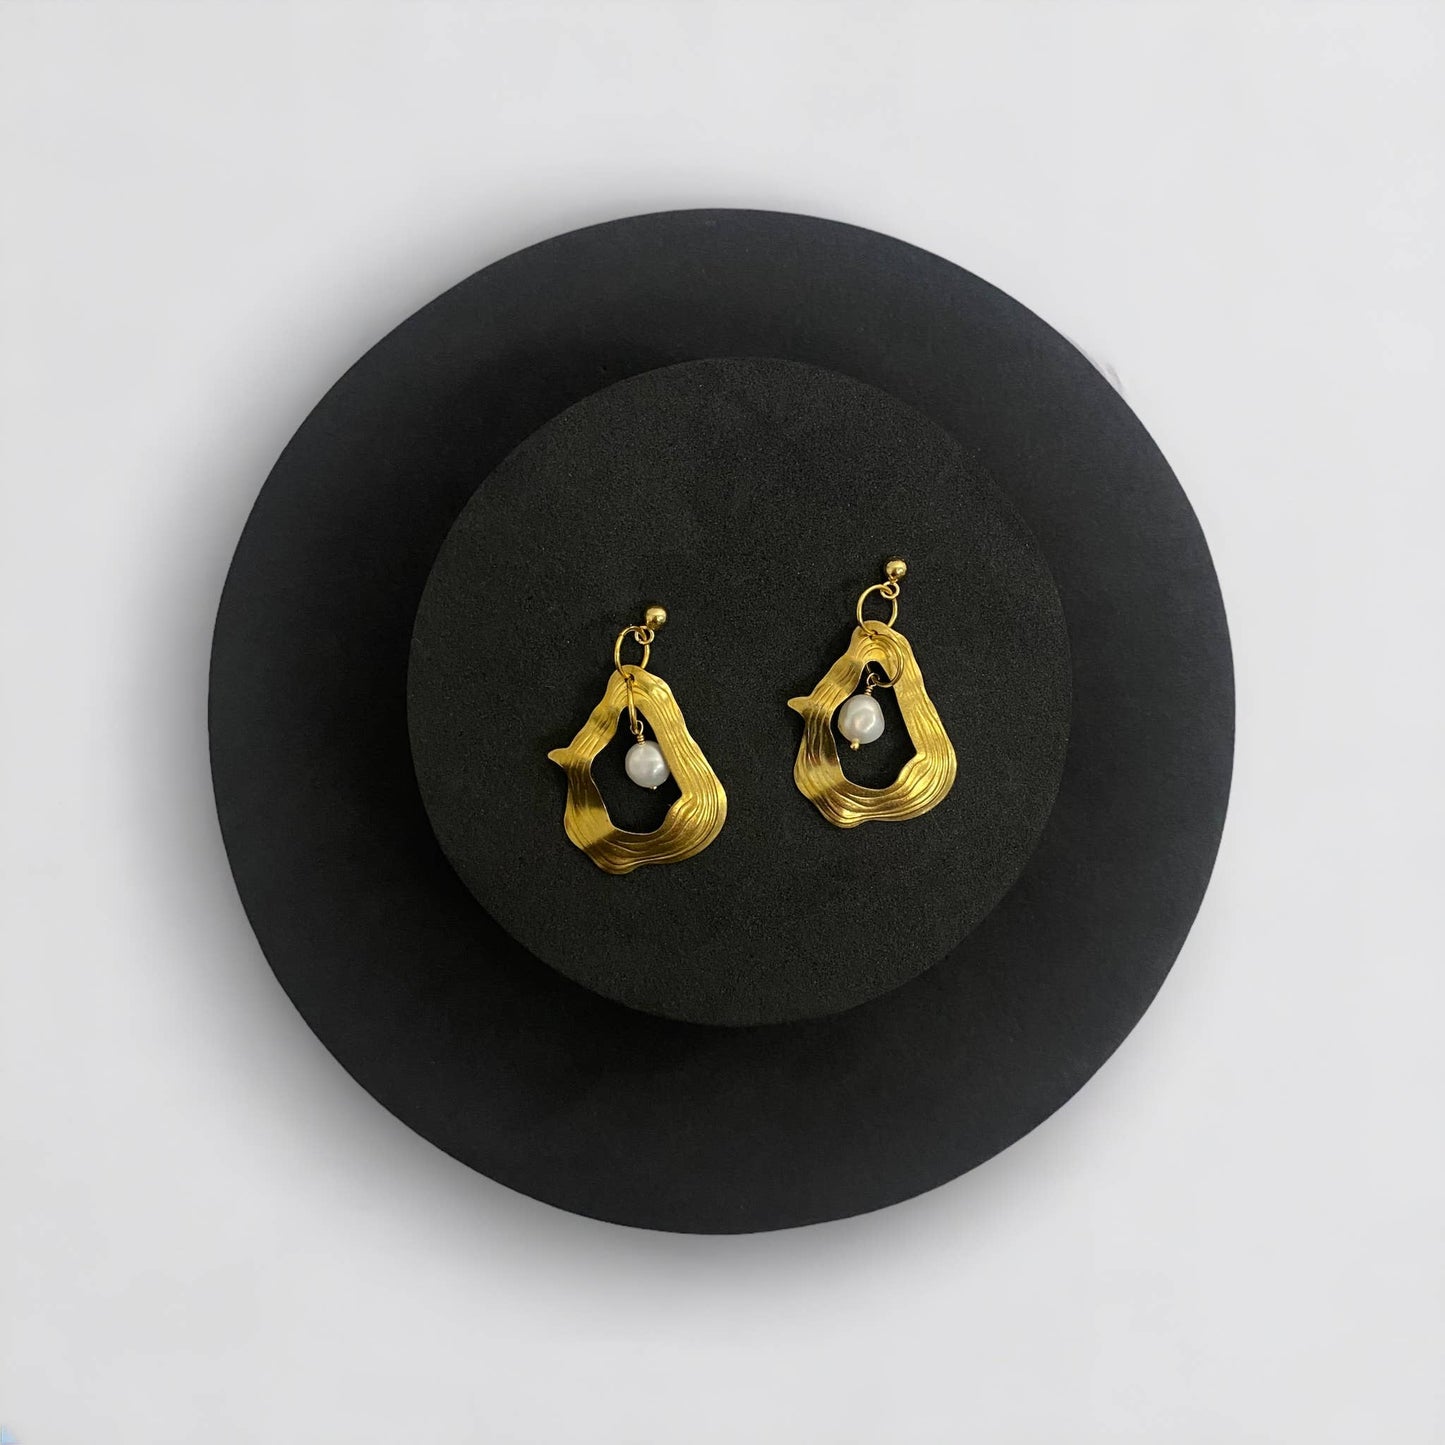 Oyster Pearl Earrings: Gold plated (nickel free) ball posts